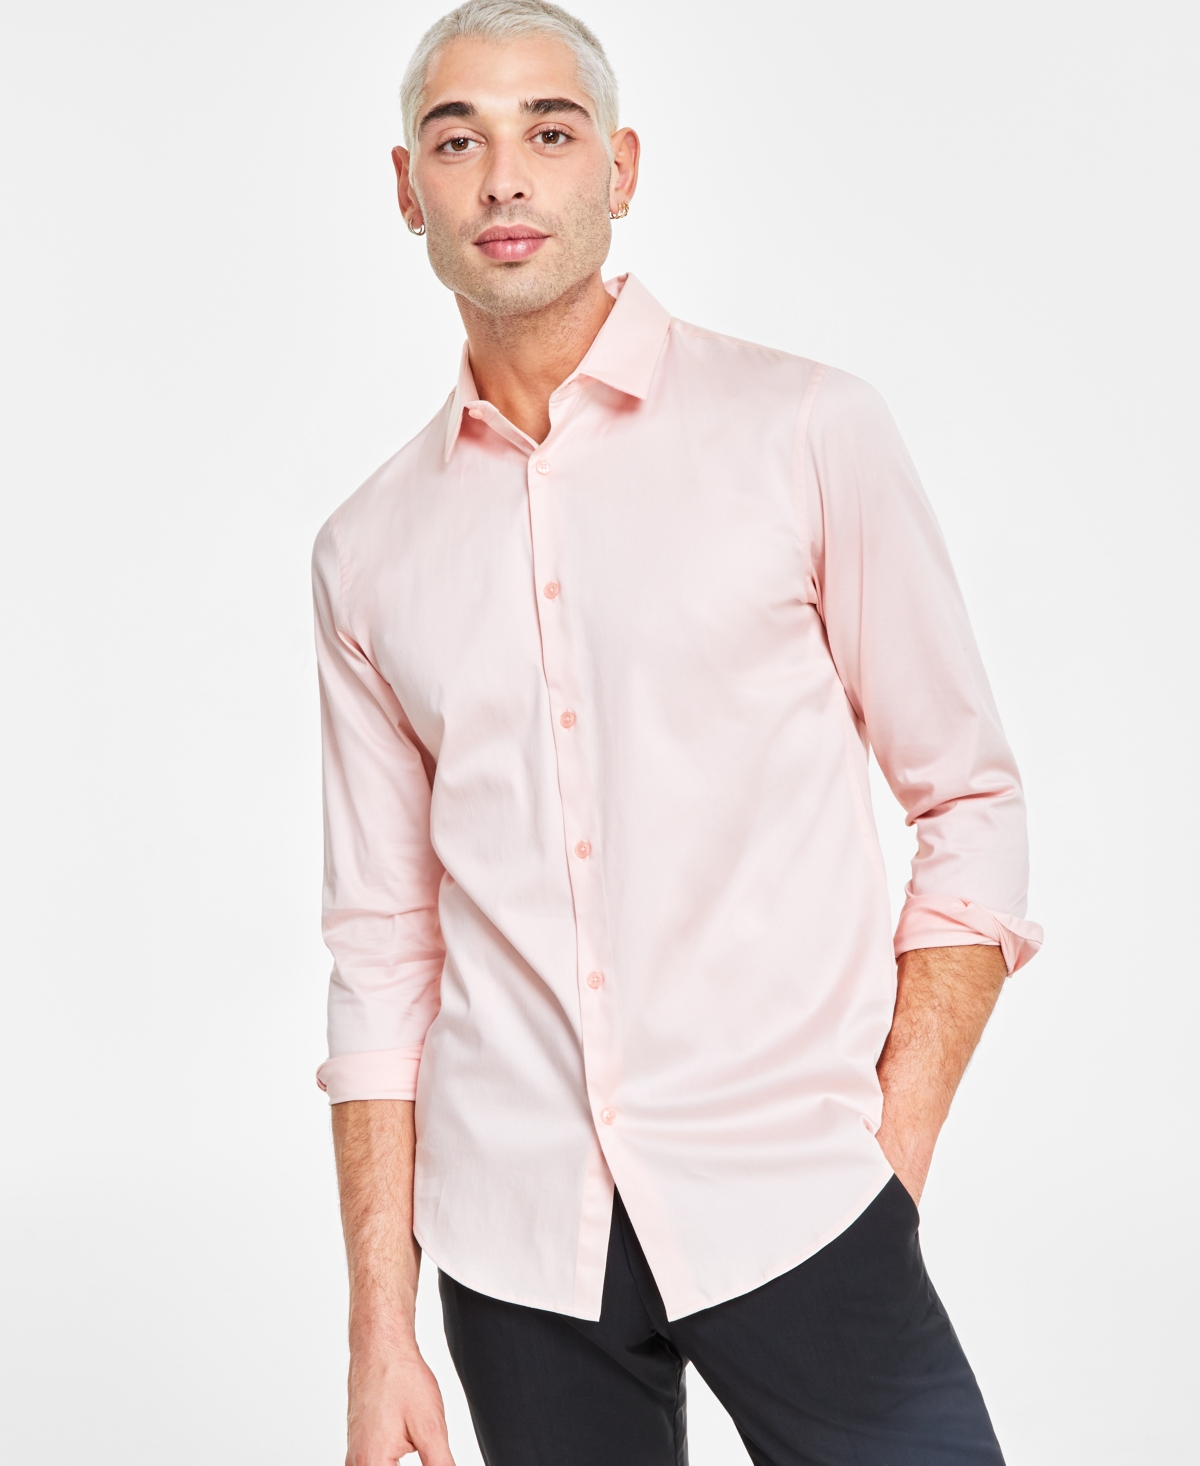 Men's Slim Fit Dress Shirt, Created for Macy's - Pure Pink